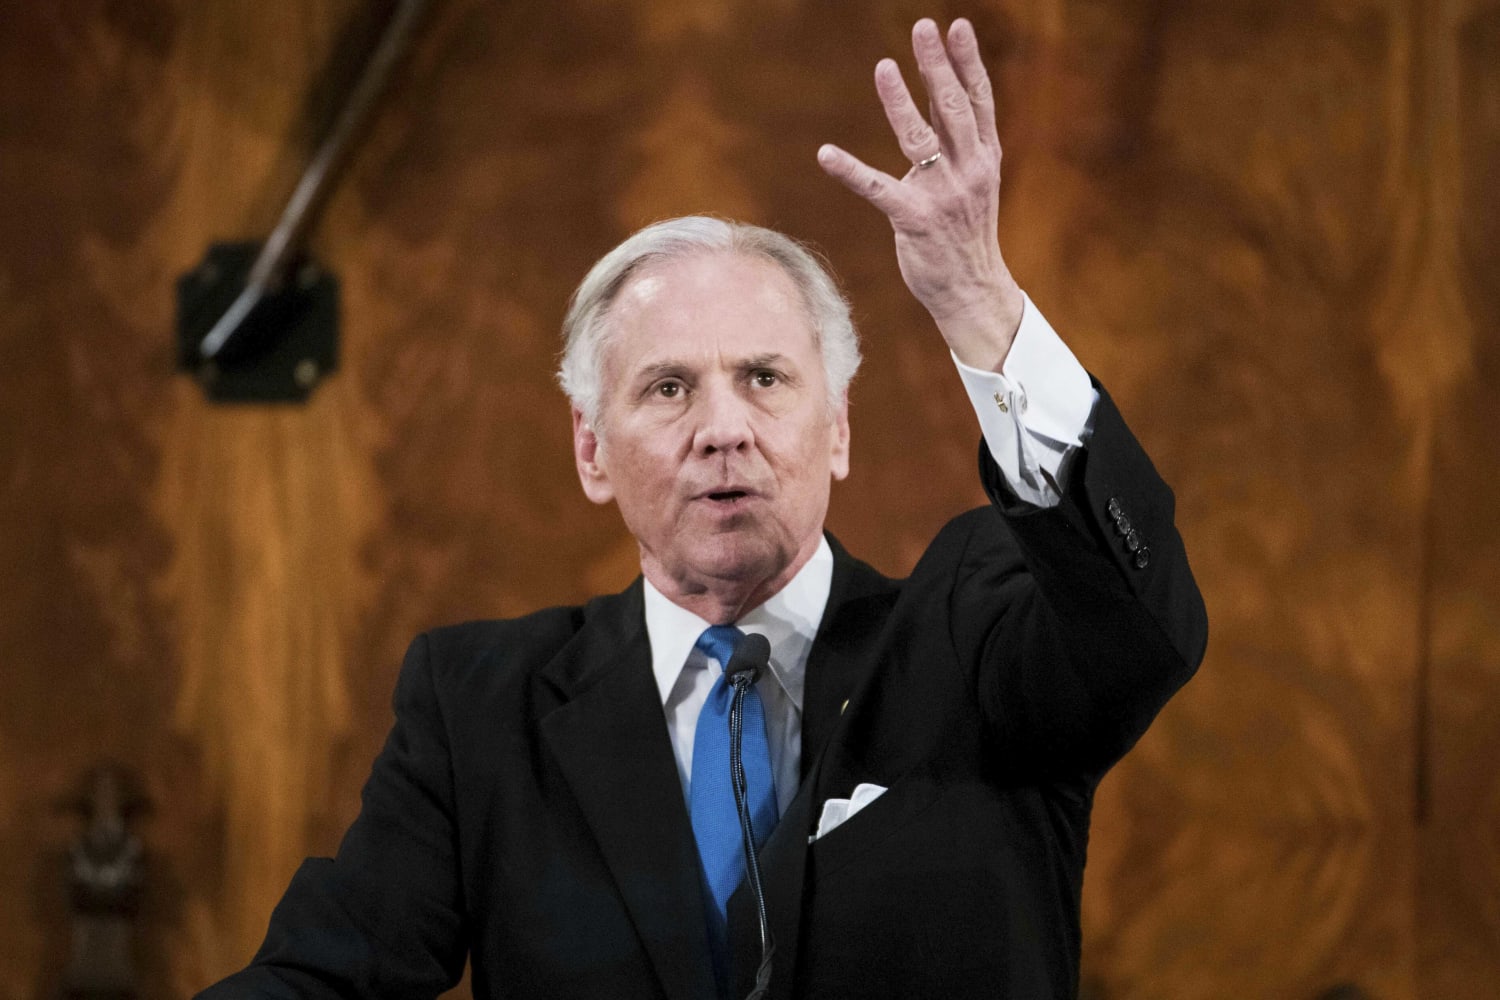 South Carolina governor faces backlash for remark about hunting Democrats with dogs